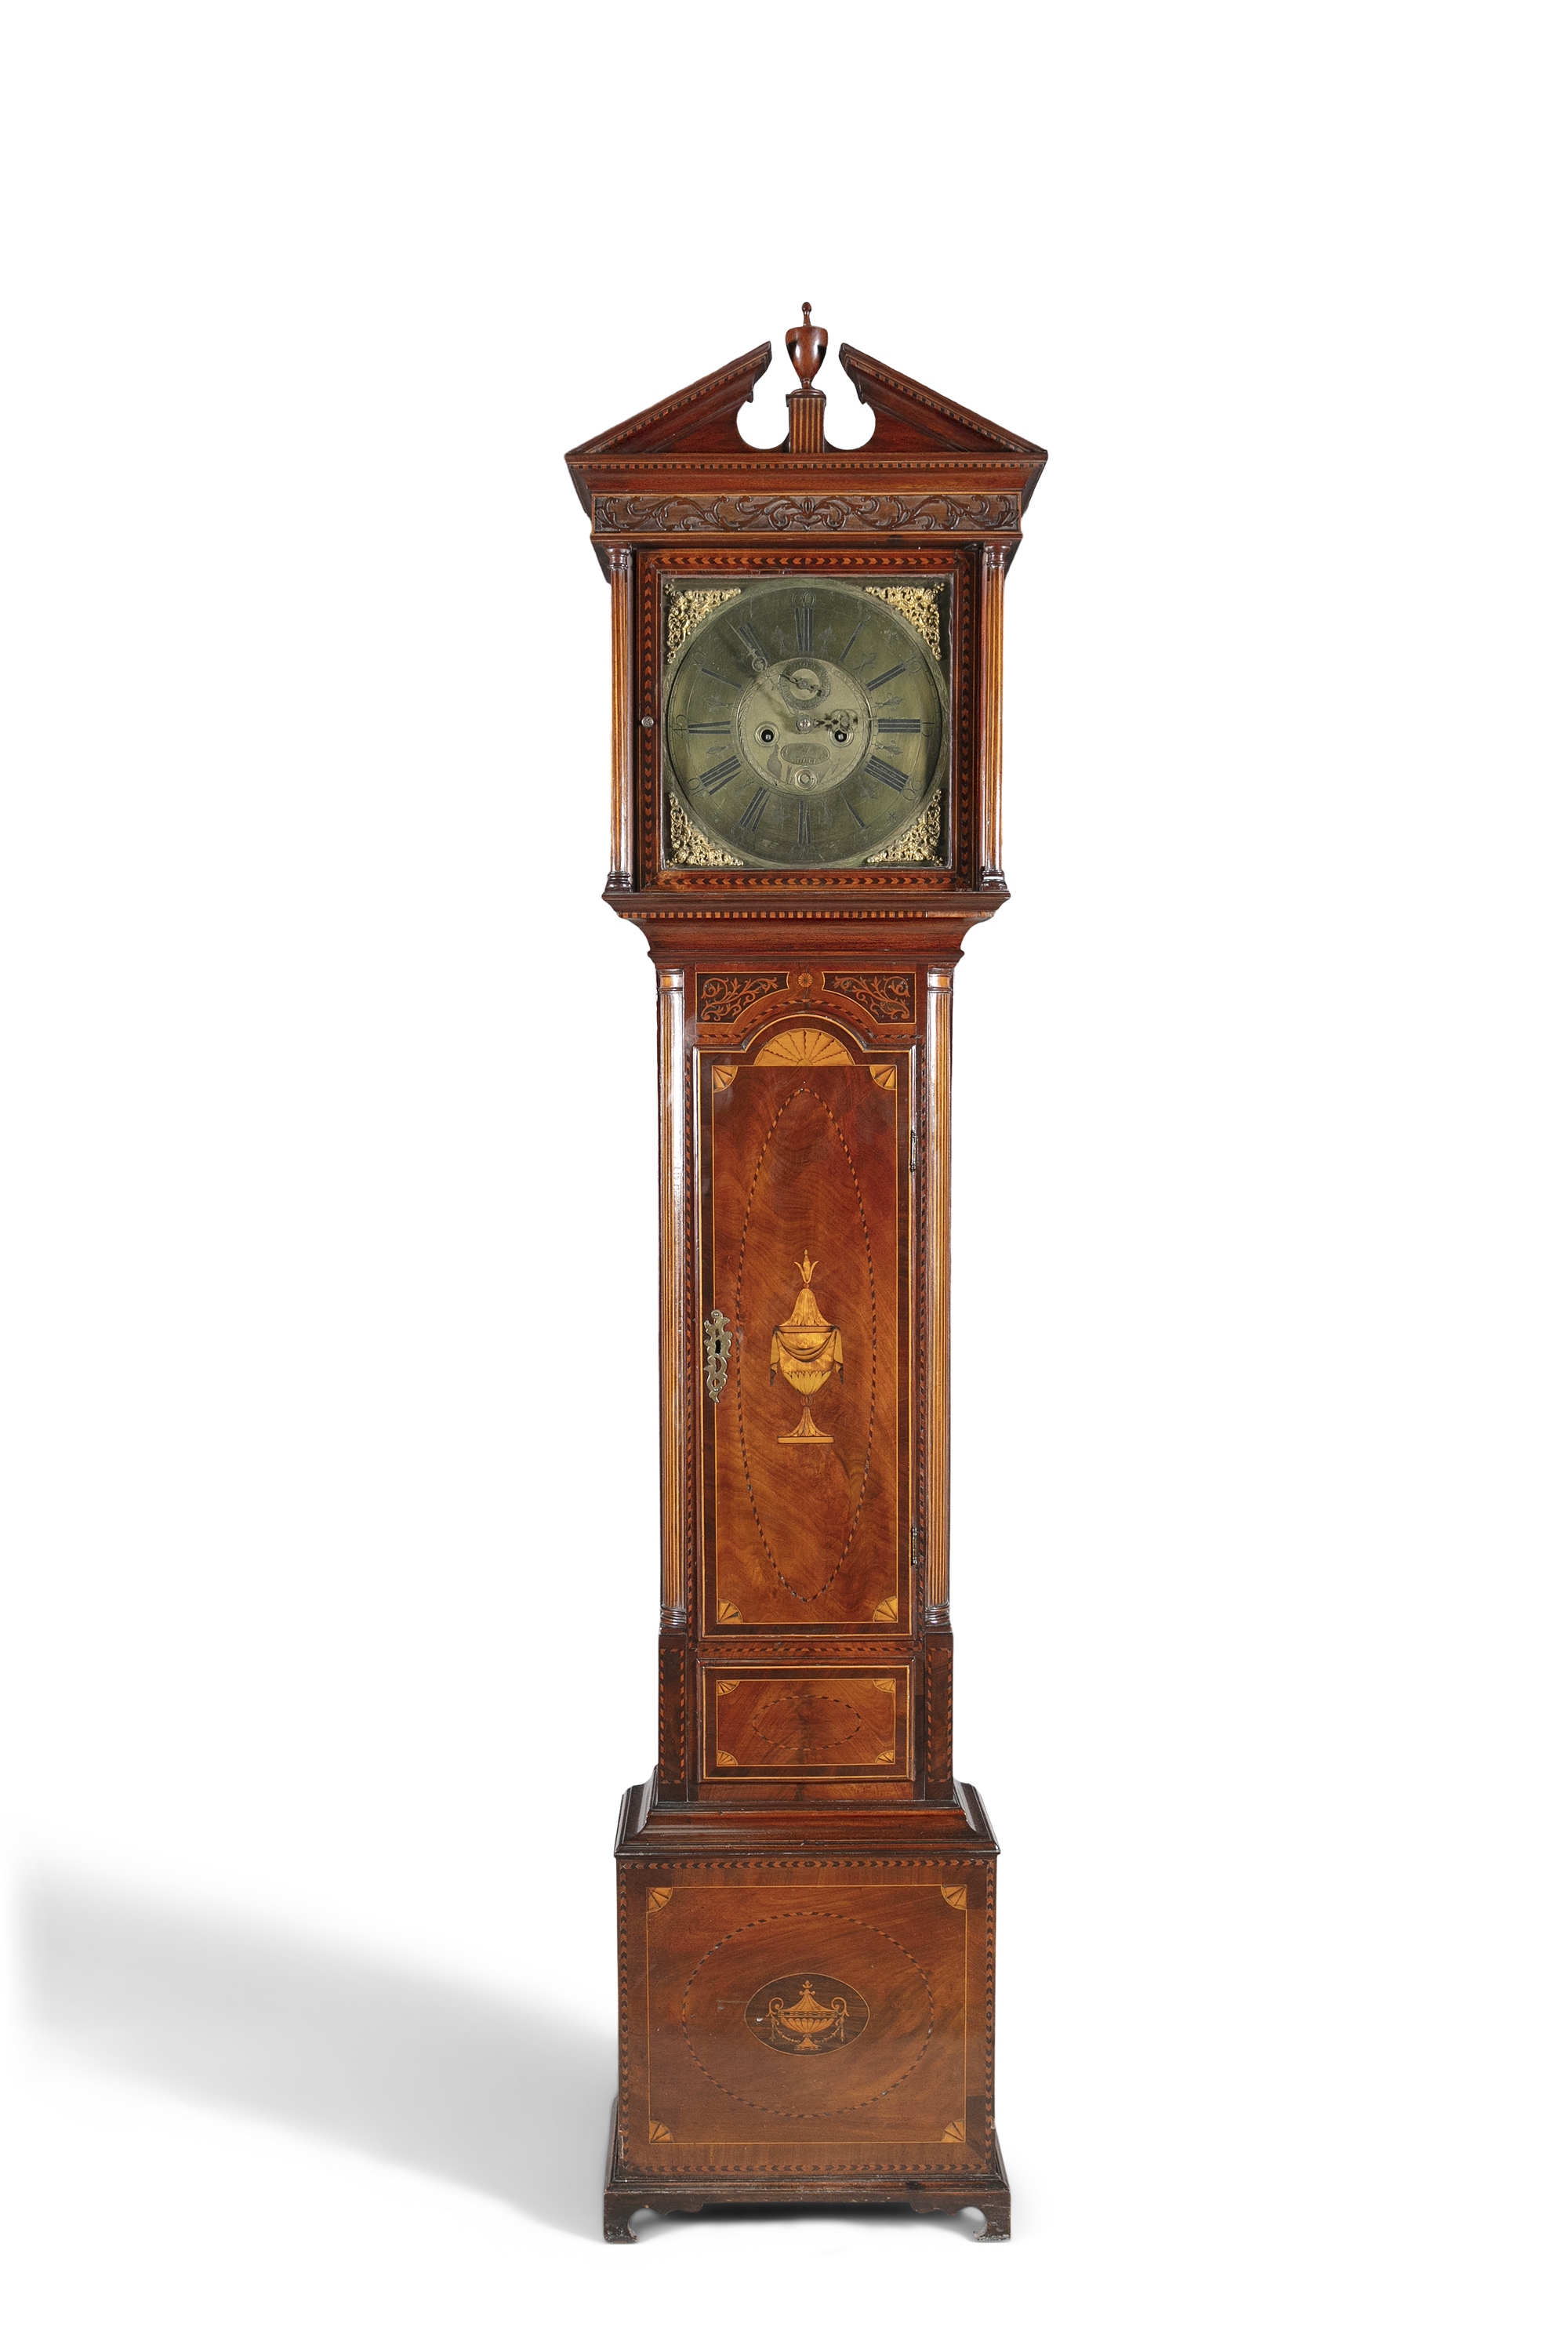 AN IRISH GEORGE III MAHOGANY AND MARQUETRY LONGCASE CLOCK, the brass dial with calendar aperture and